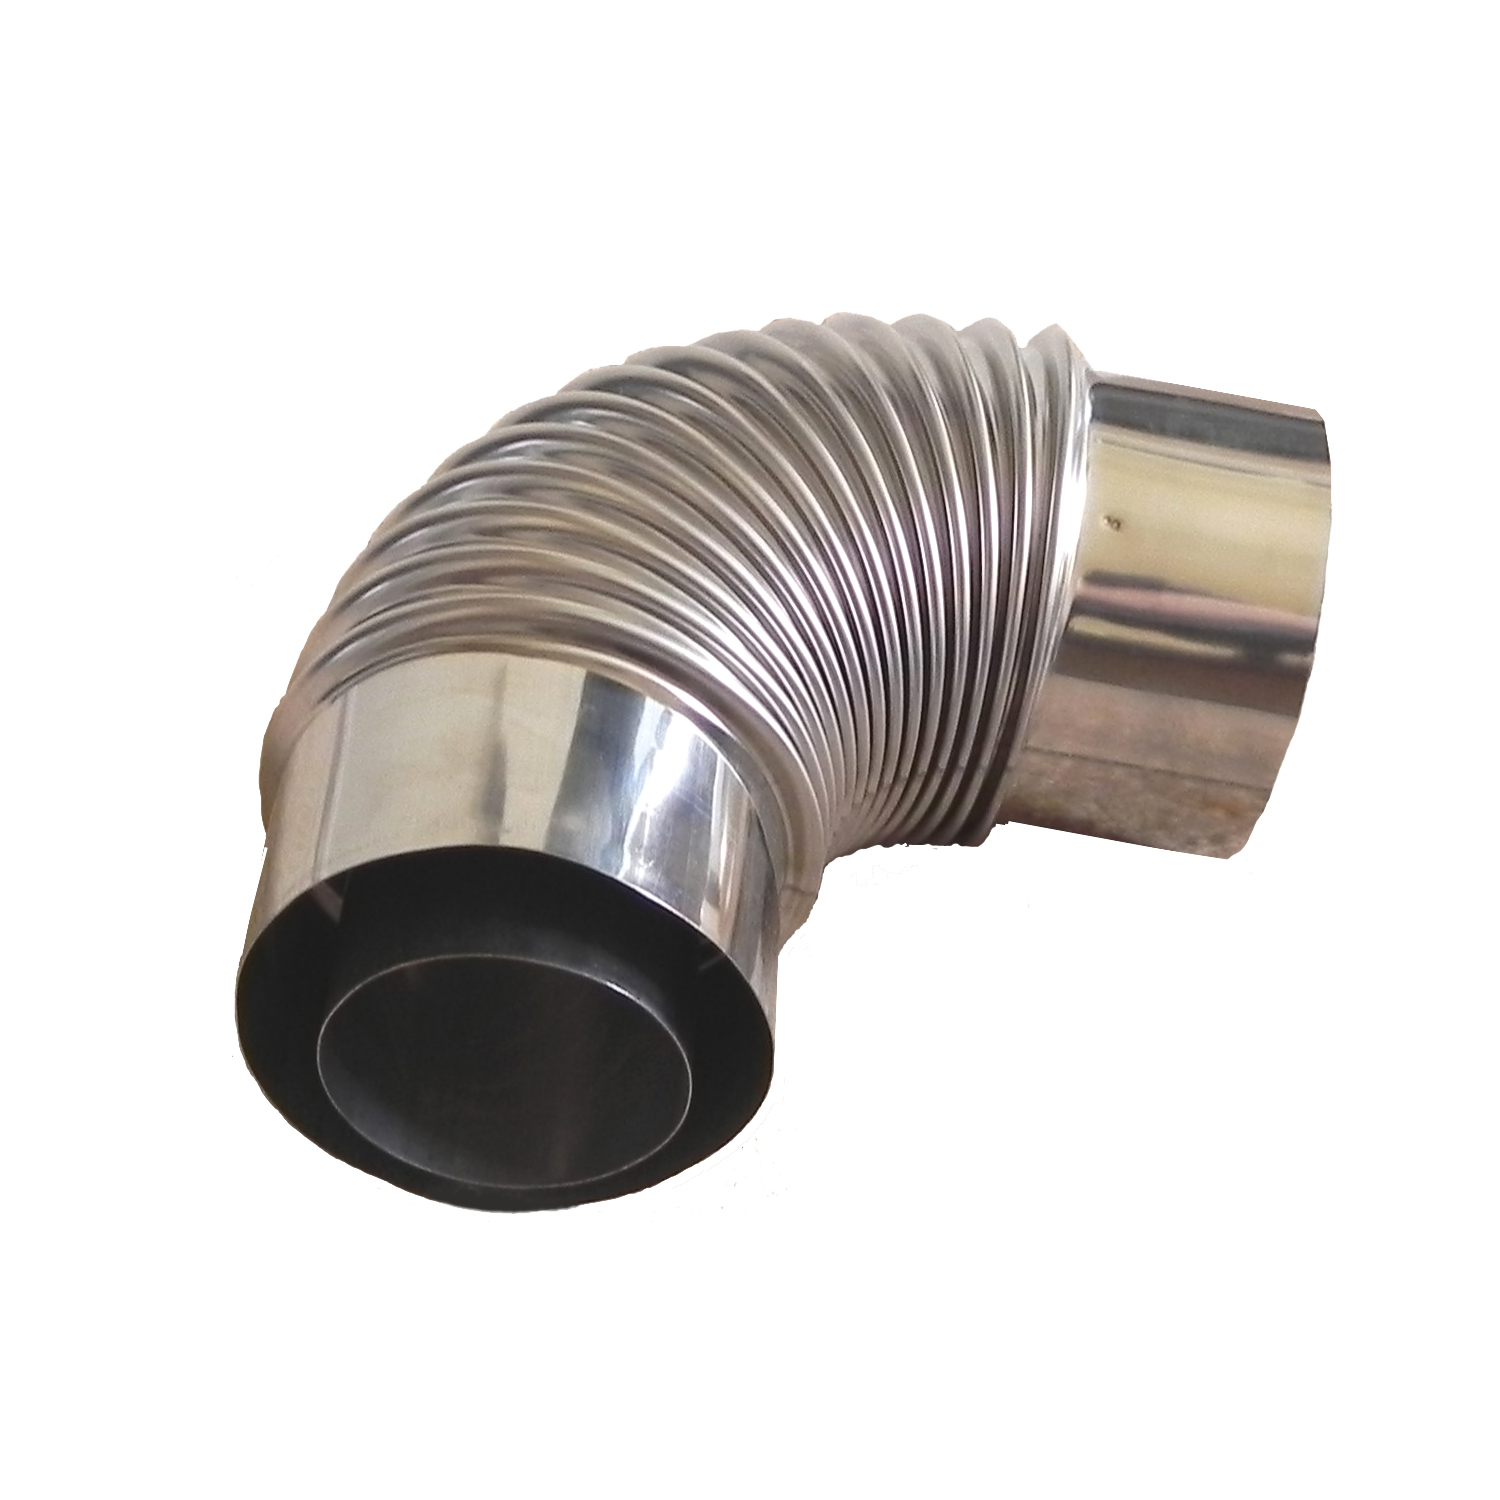 90* Co-Axial Stainless Steel Direct Vent Pipe Elbow